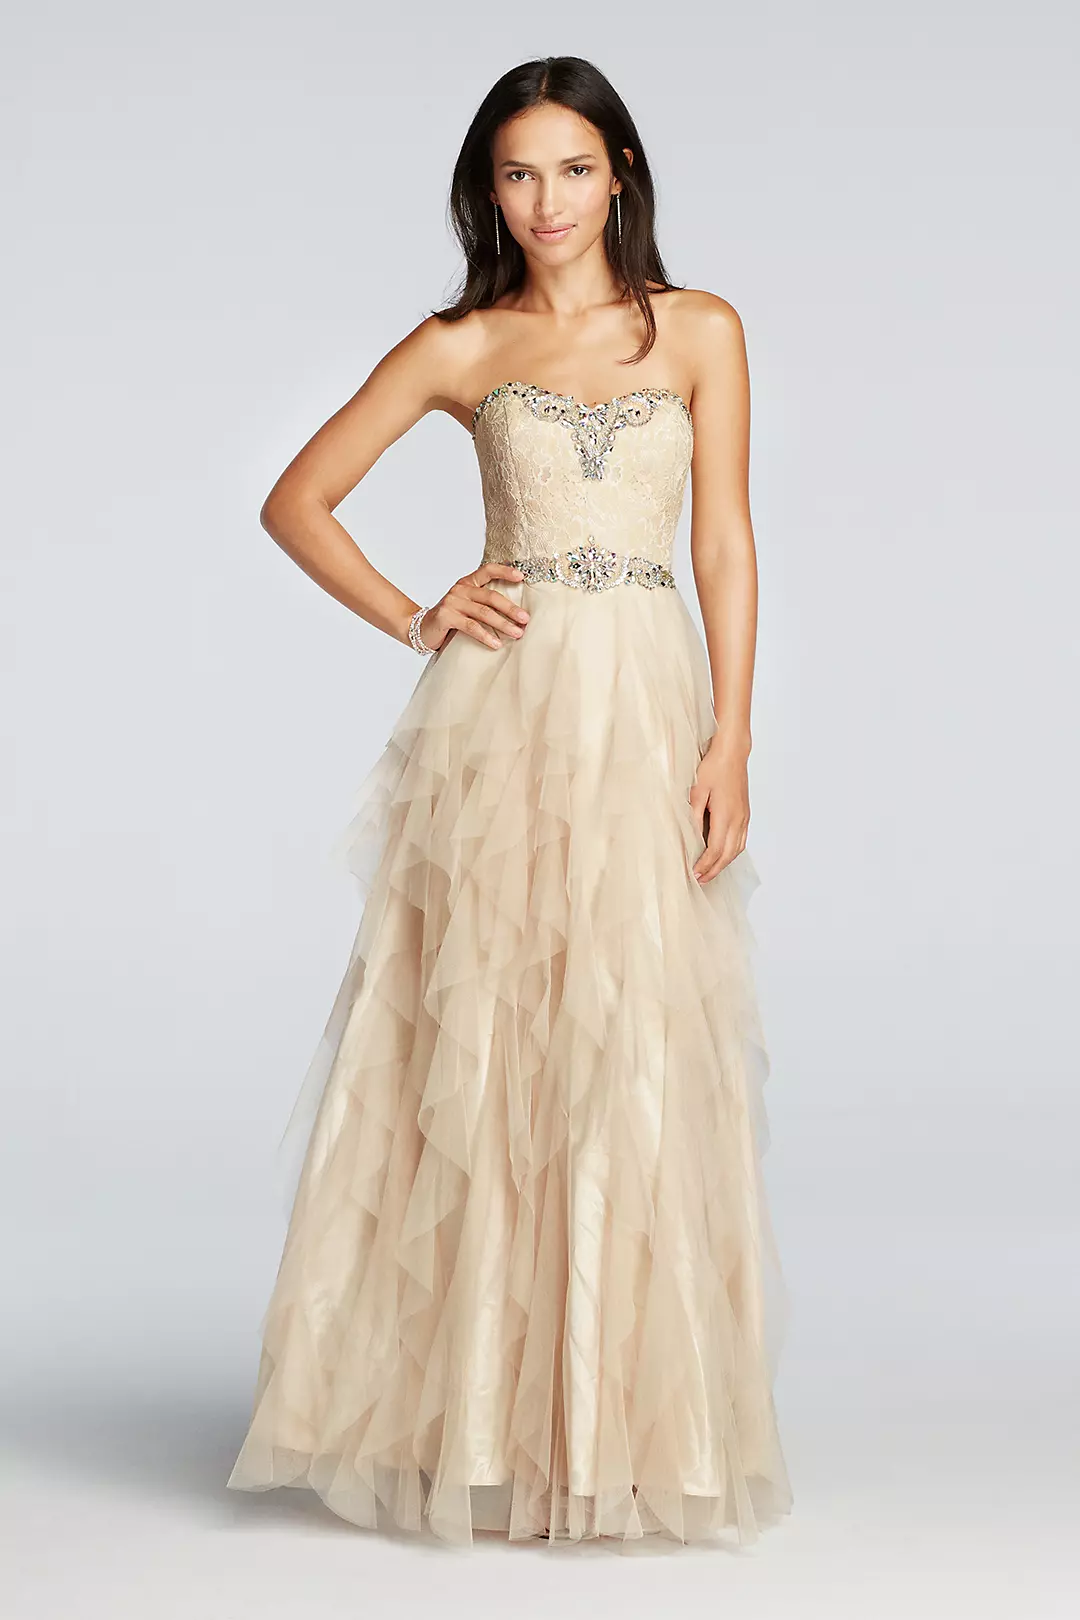 Crystal Beaded Prom Dress with Ruffled Skirt Image